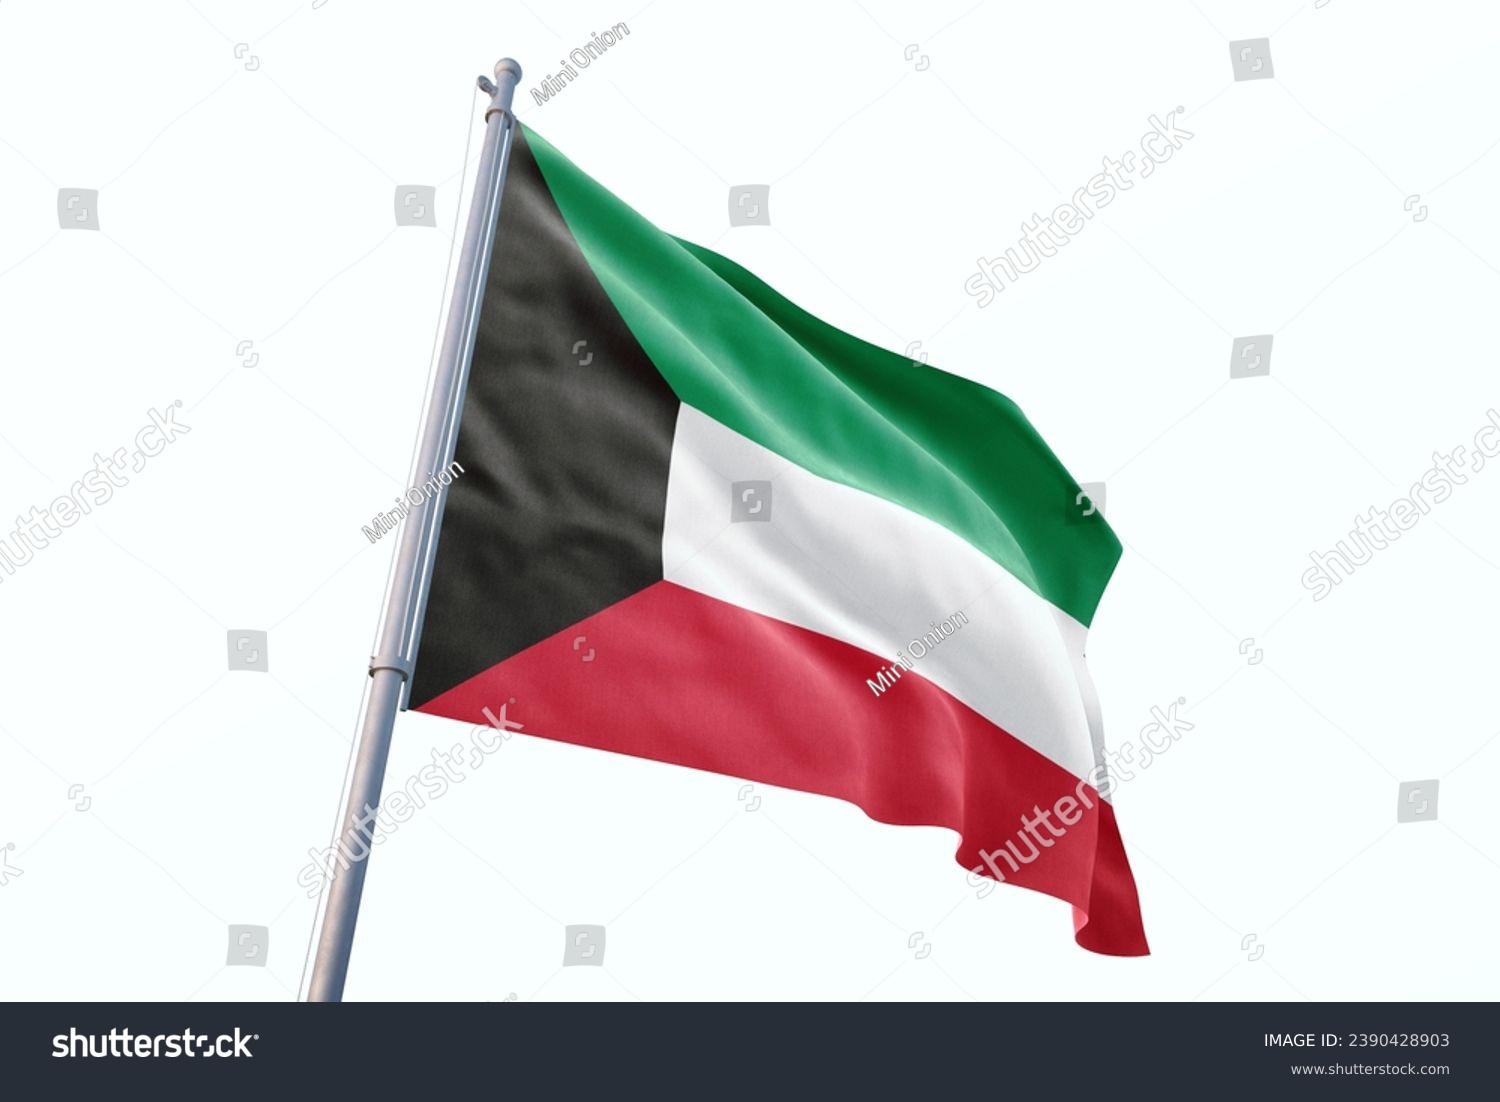 Waving flag of Kuwait in white background. Kuwait flag for independence day. The symbol of the state on wavy fabric. #2390428903